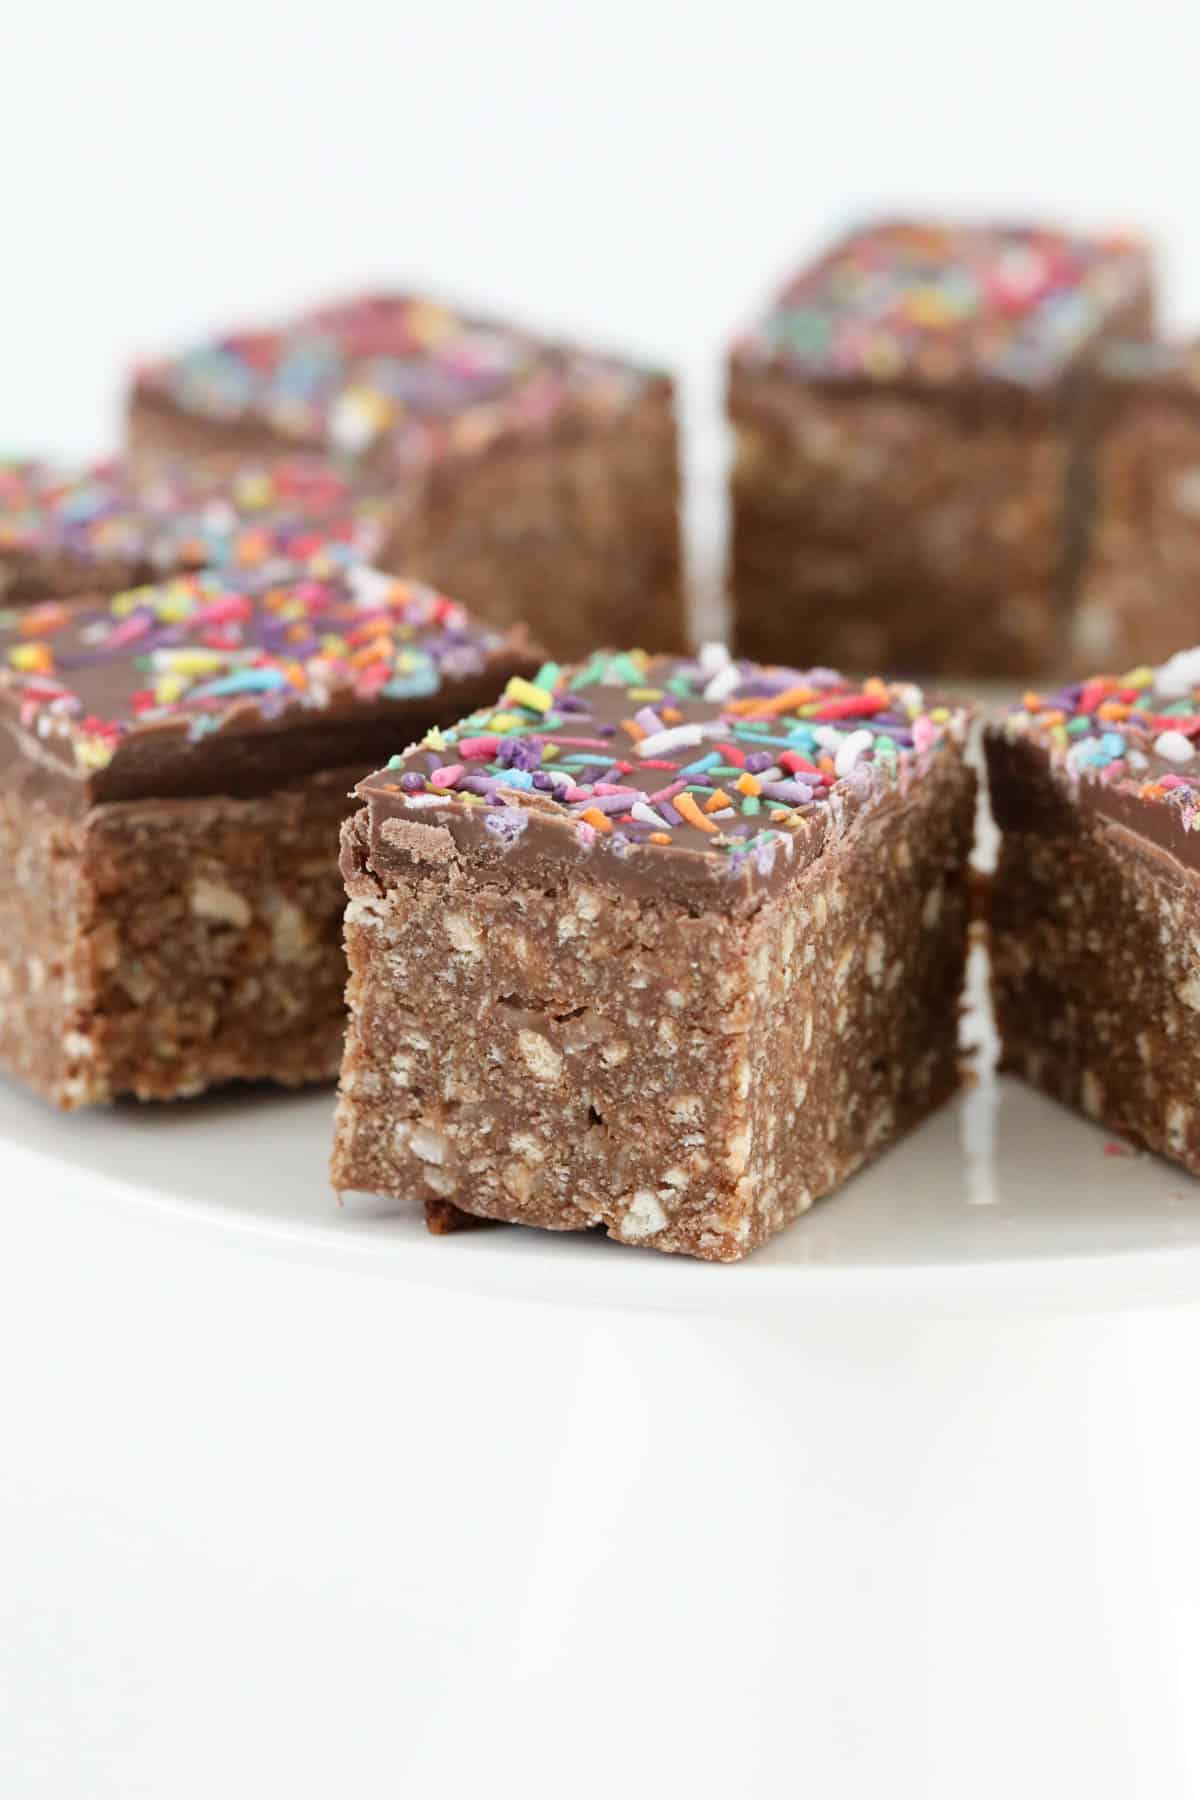 Chocolate slice with sprinkles on top.